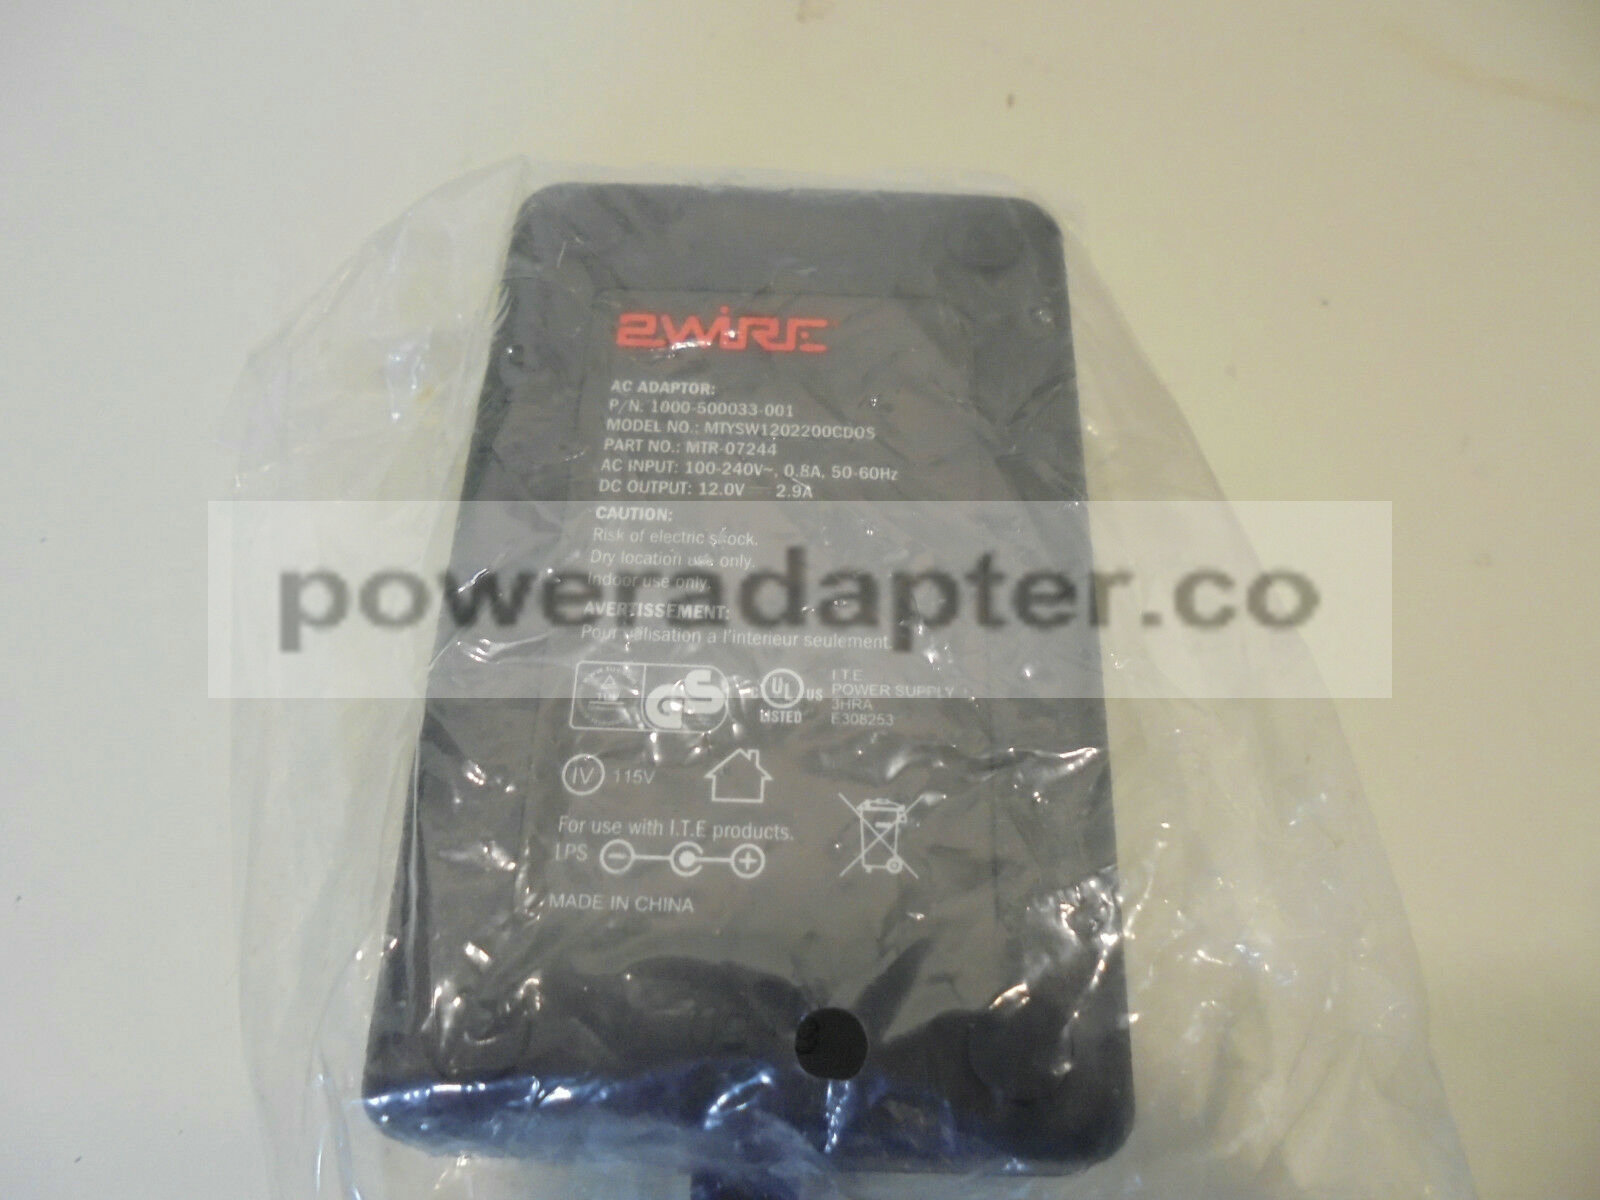 2Wire AC Adapter Model MTYSW1202200CD0S Output 12V 2.9A Condition: Open box: A new, unused item with absolutely no